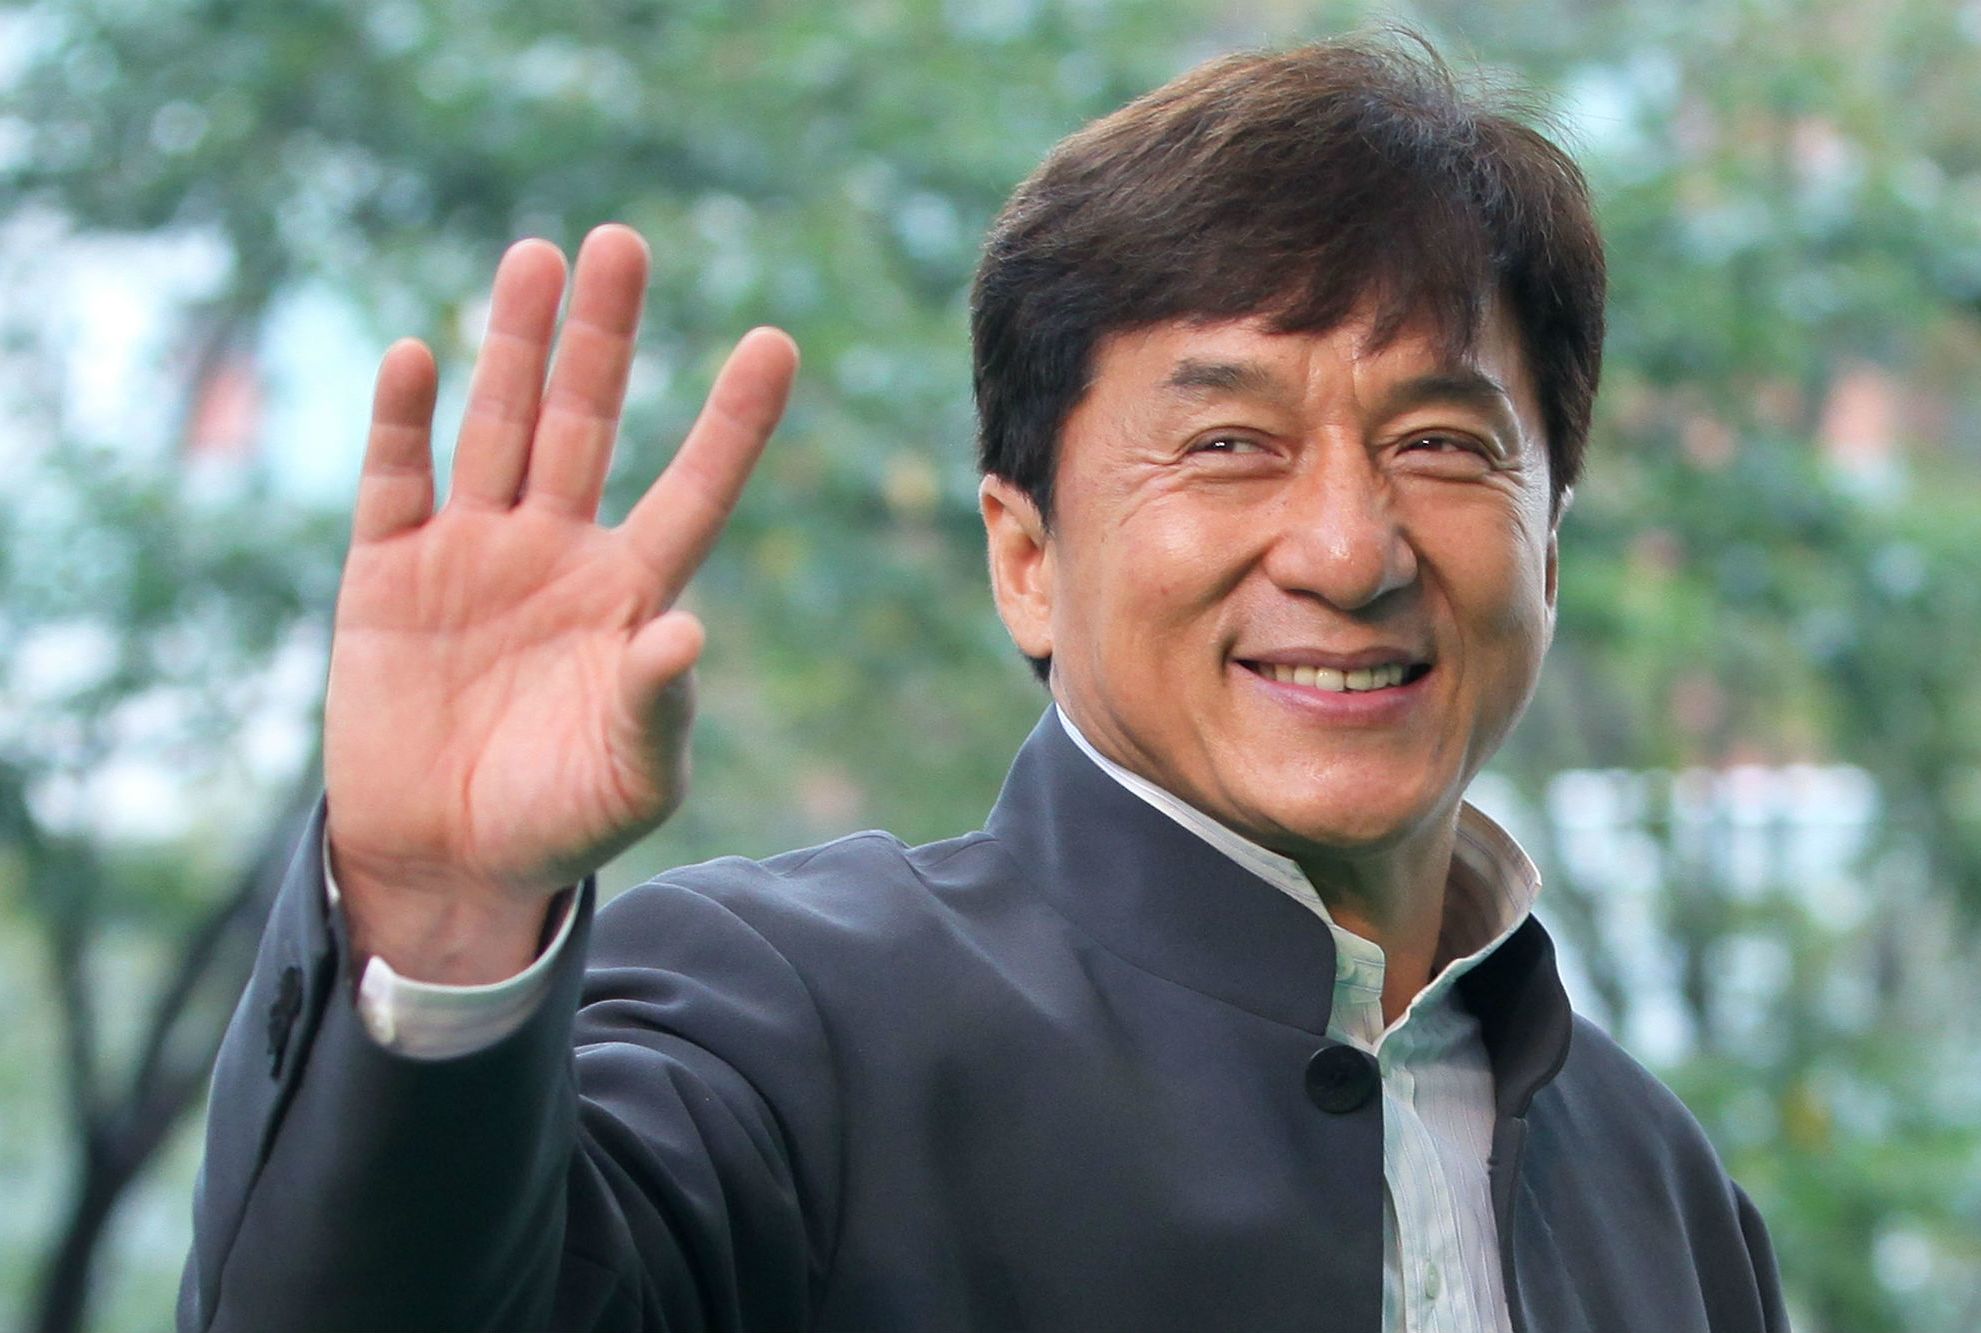 Xxx Movie Jackie Chan - 11 Things You Might Not Know About Jackie Chan | Mental Floss